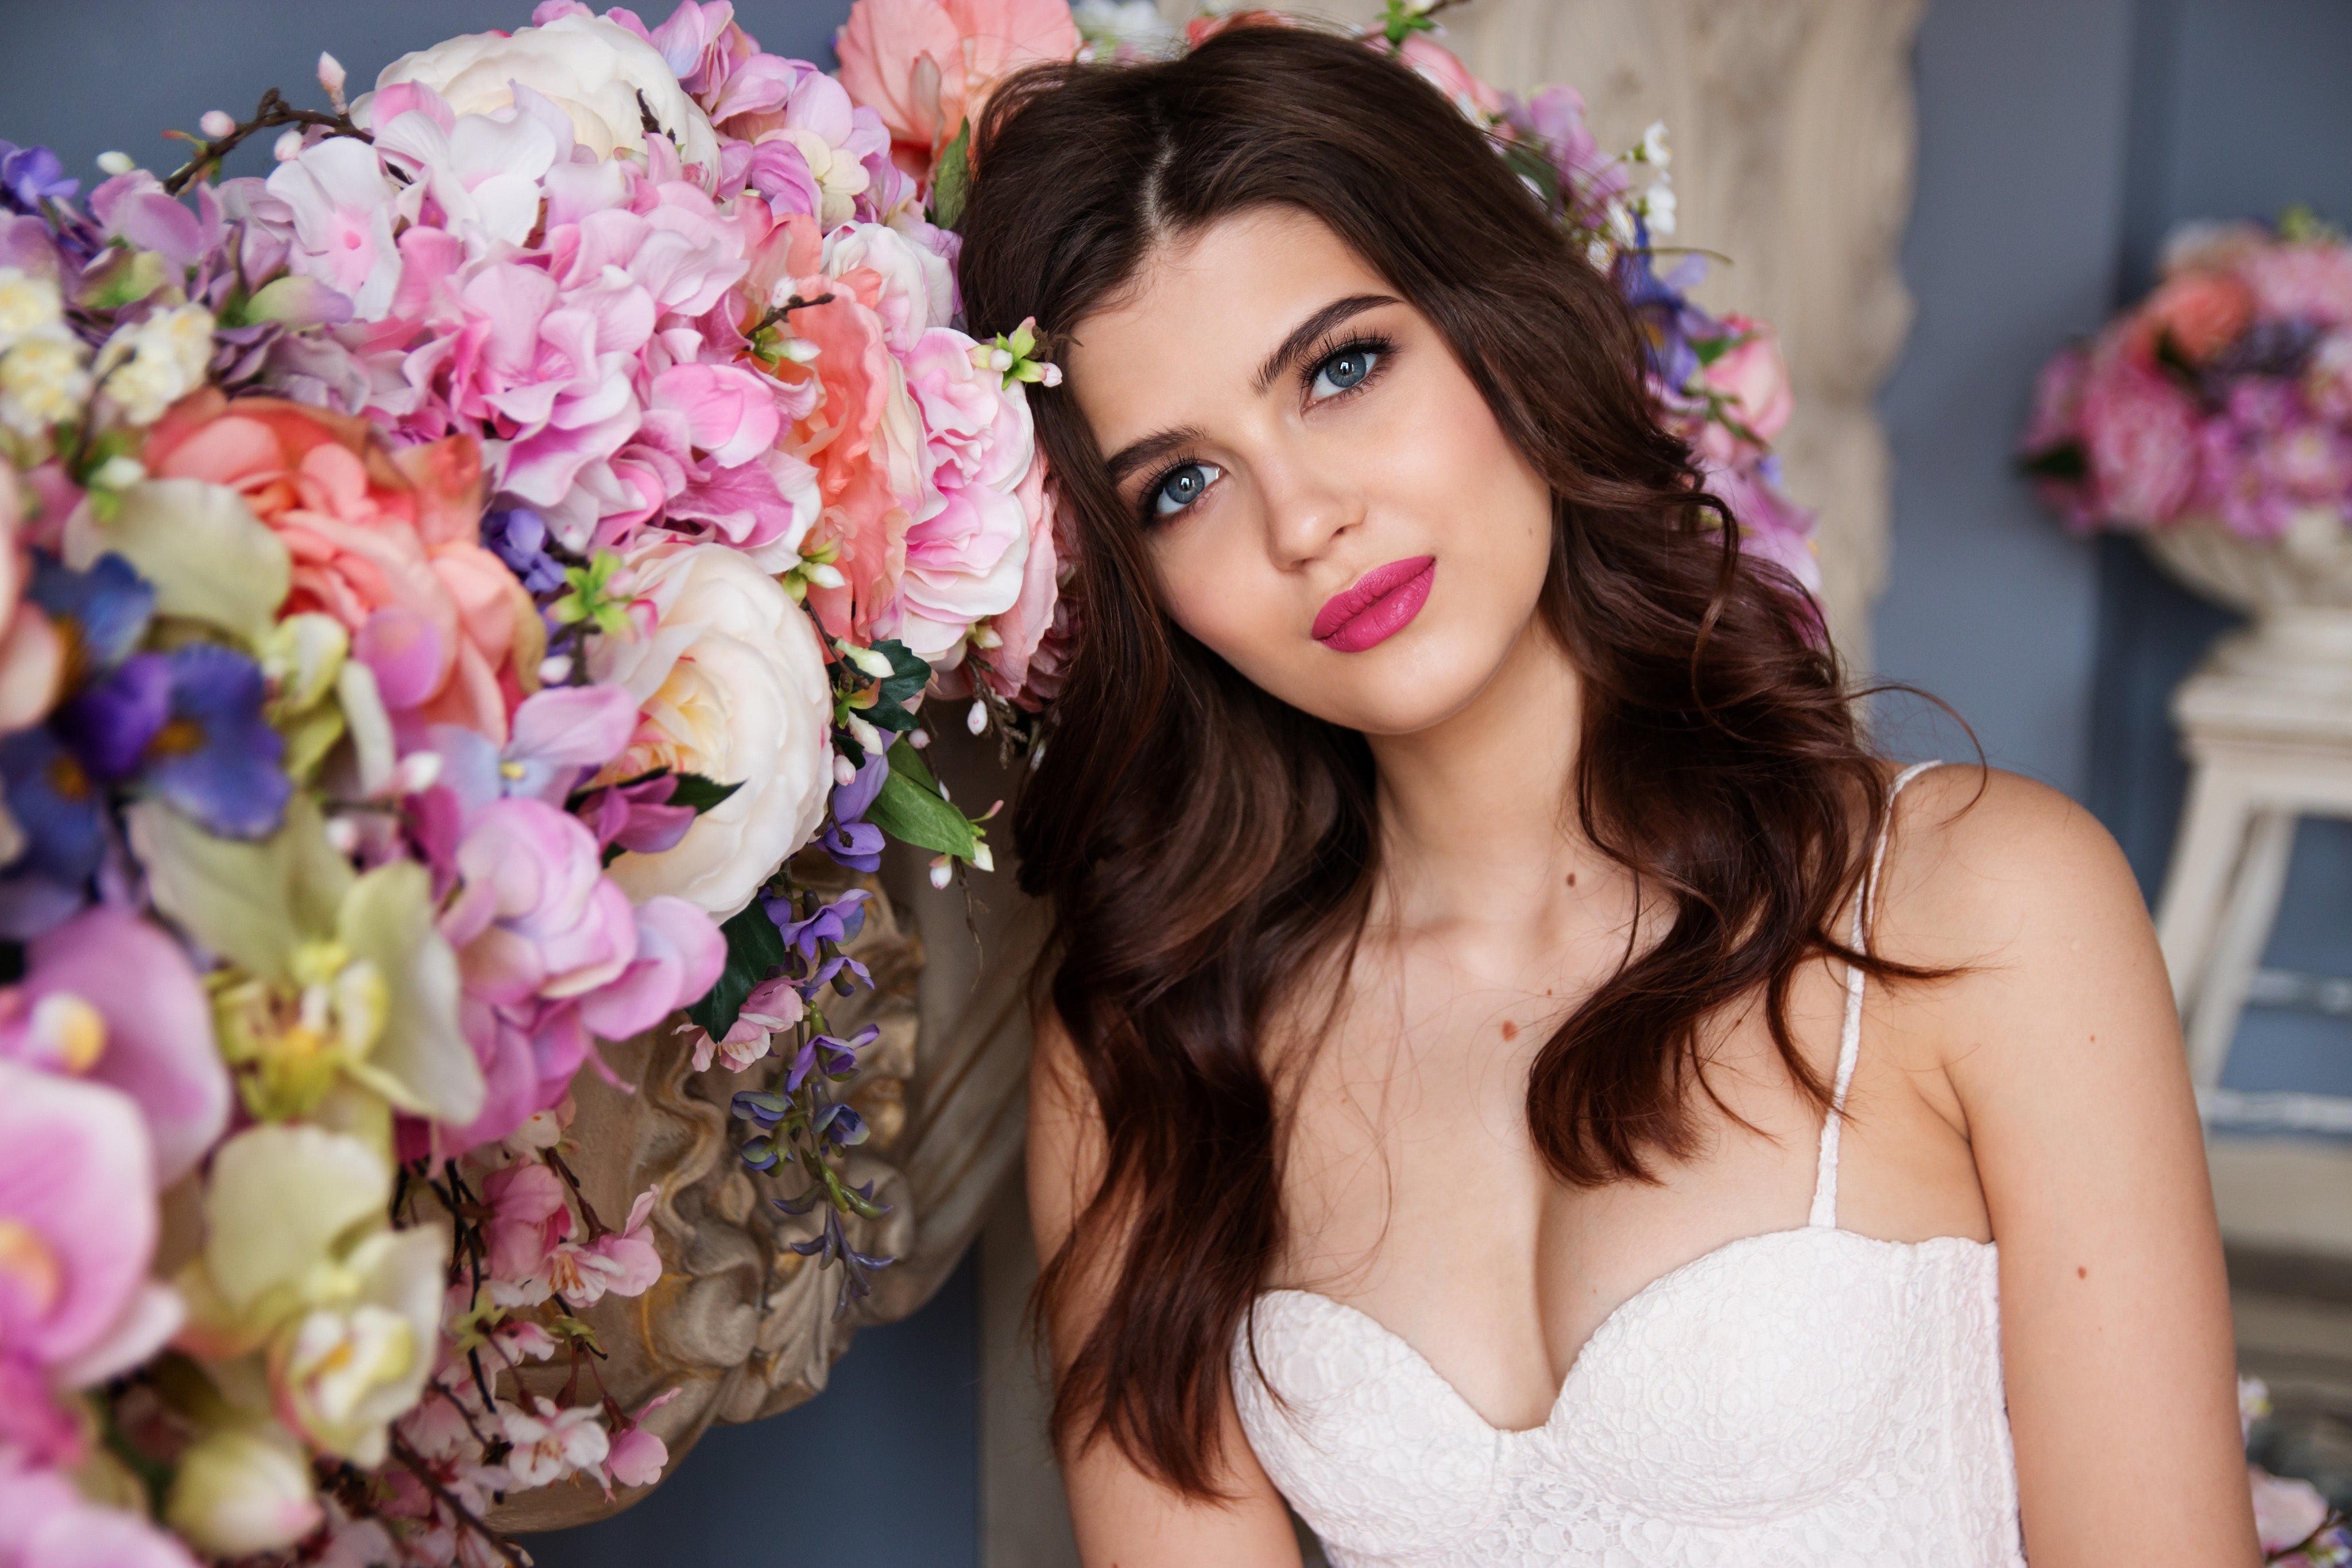 Portrait of Woman With Pink Roses, Photoshoot, Woman, Wedding, Rose, HQ Photo